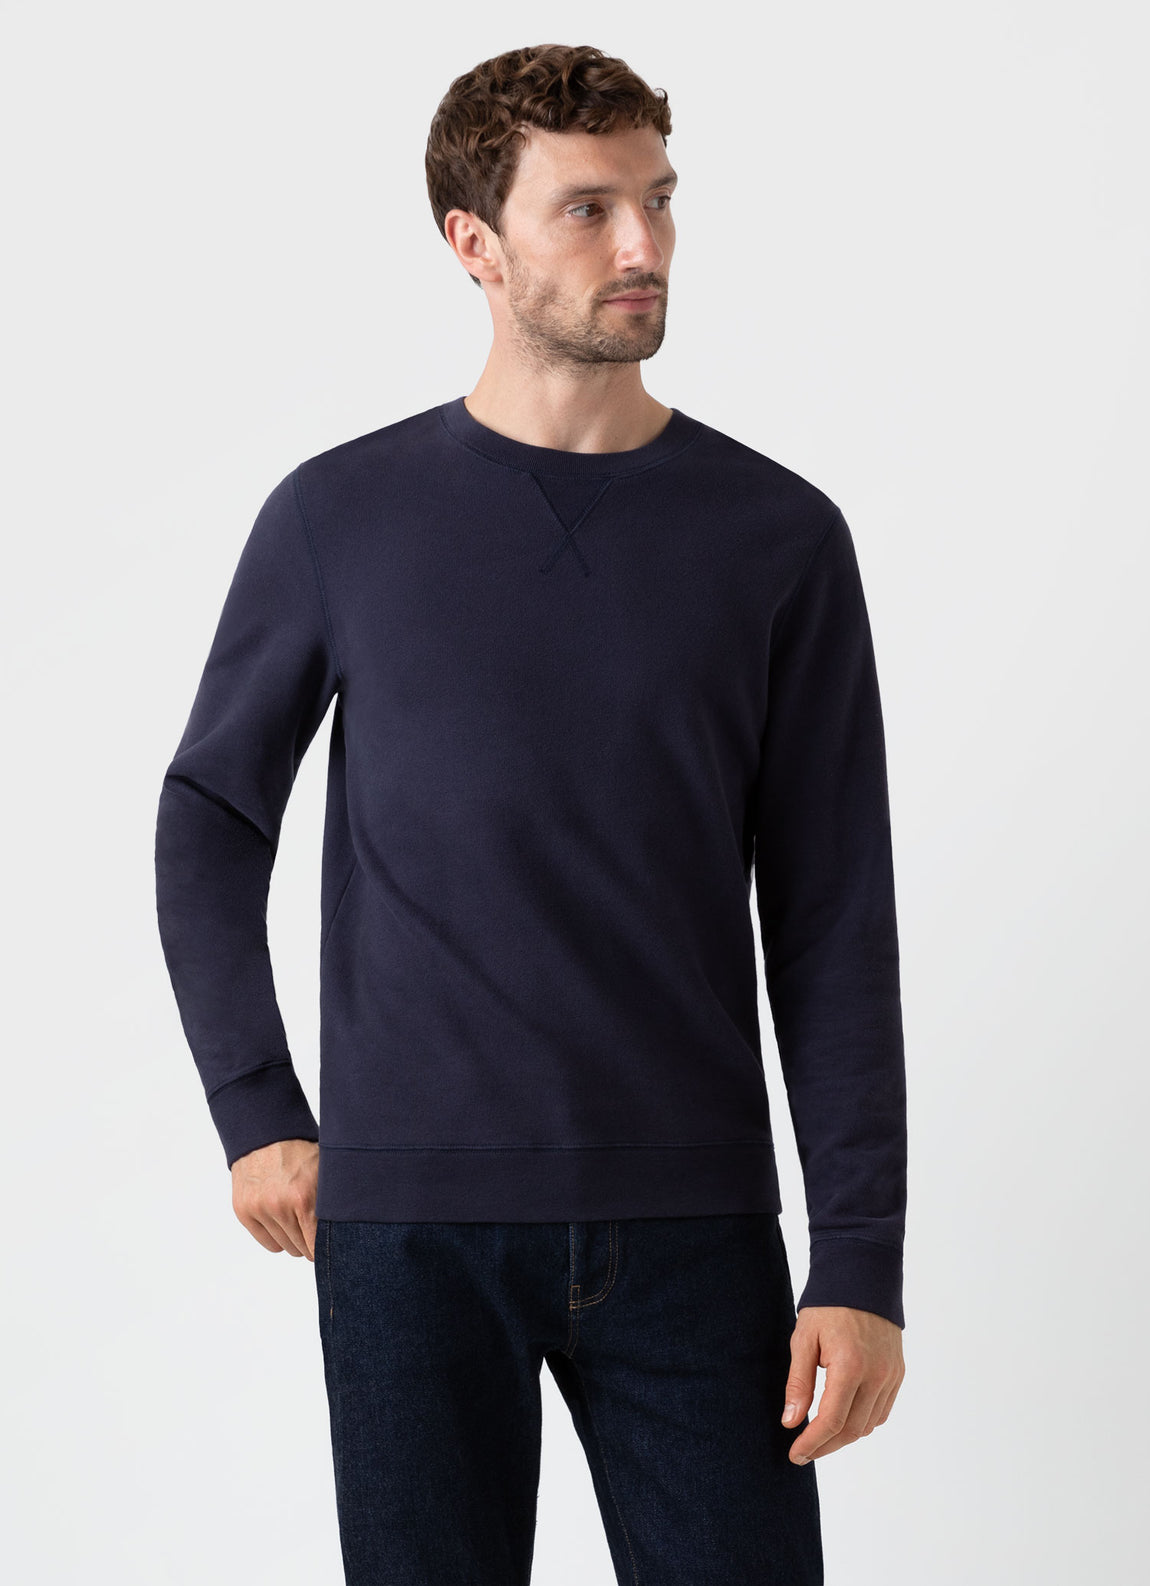 Sweat homme outwater guerilla navy blue